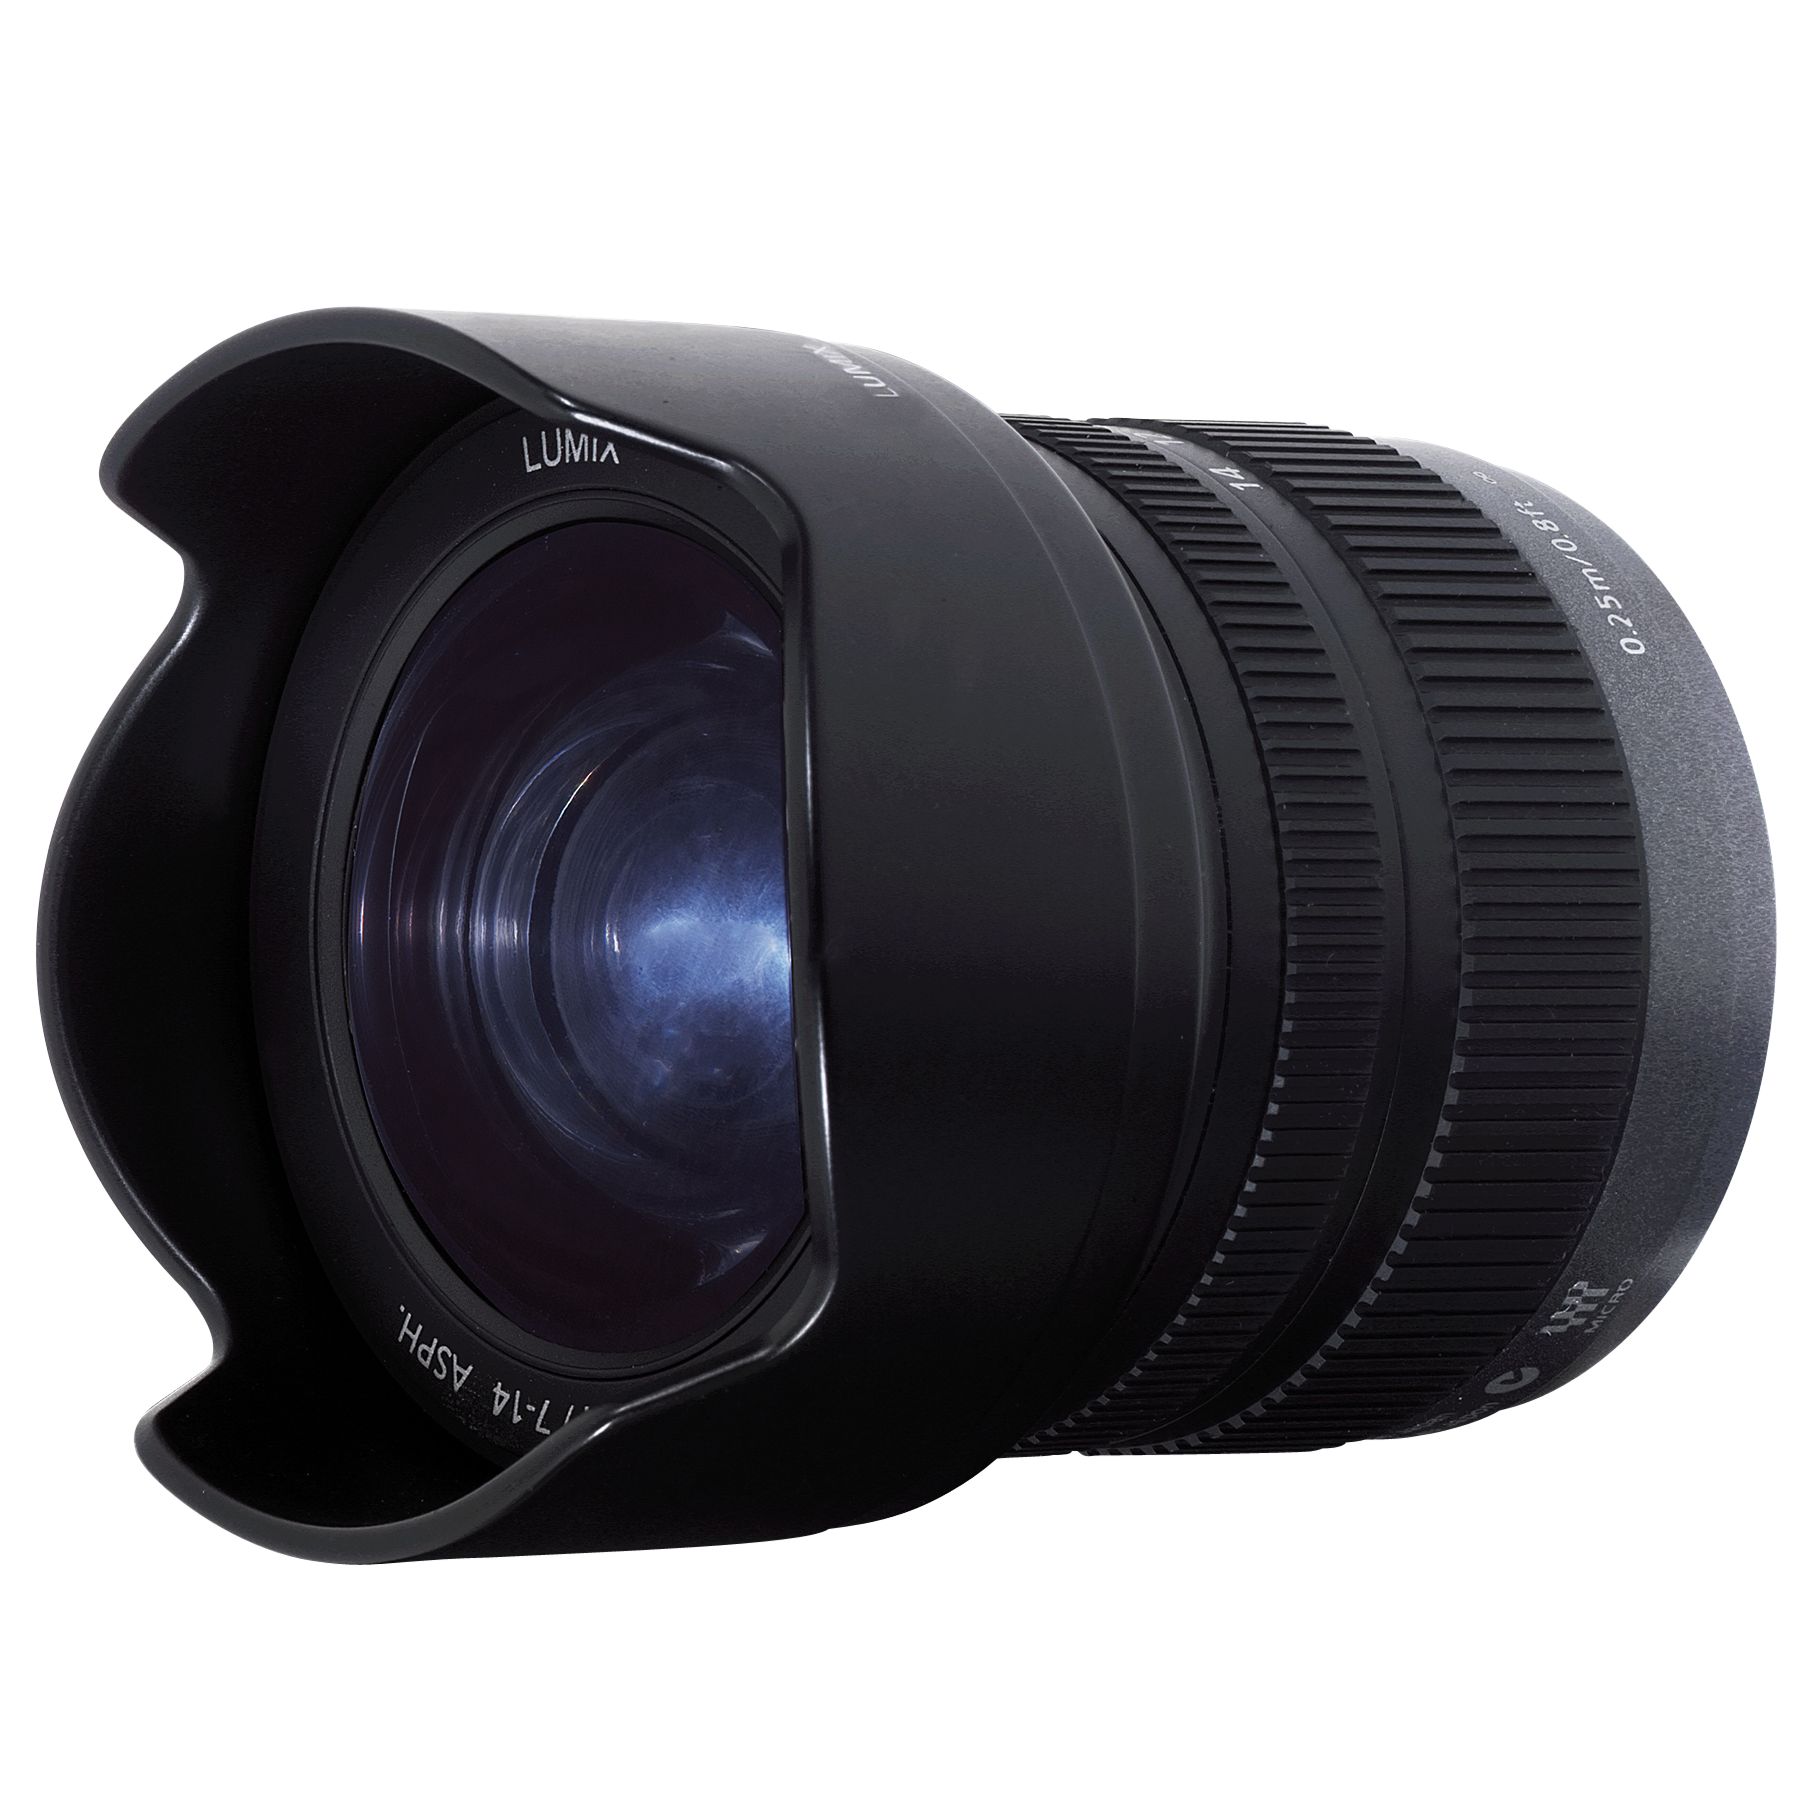 Panasonic H-F007014E 14-28mm Micro Four Thirds Ultra Wide Angle Lens at JohnLewis